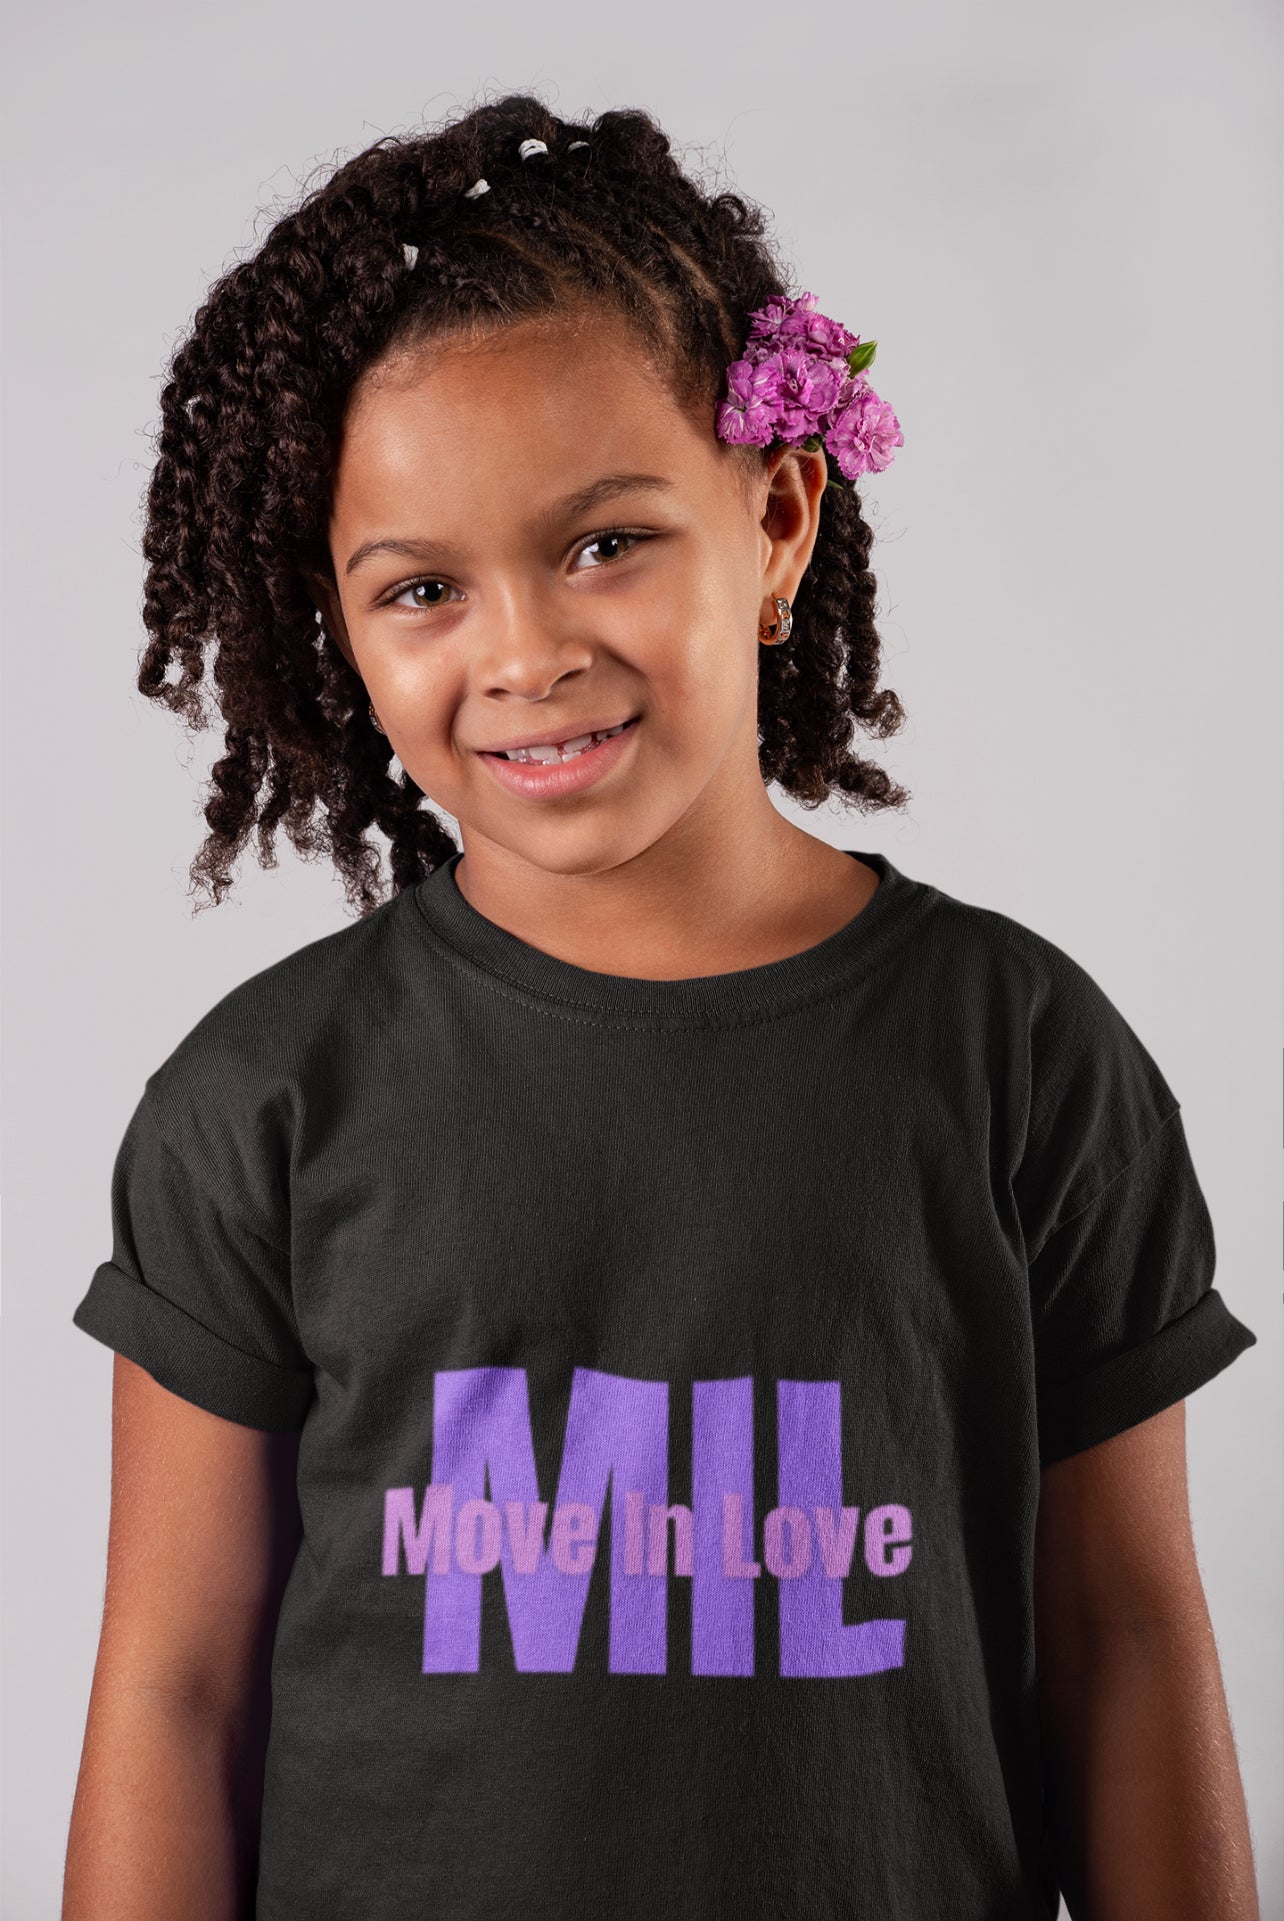 Move In Love T Shirt